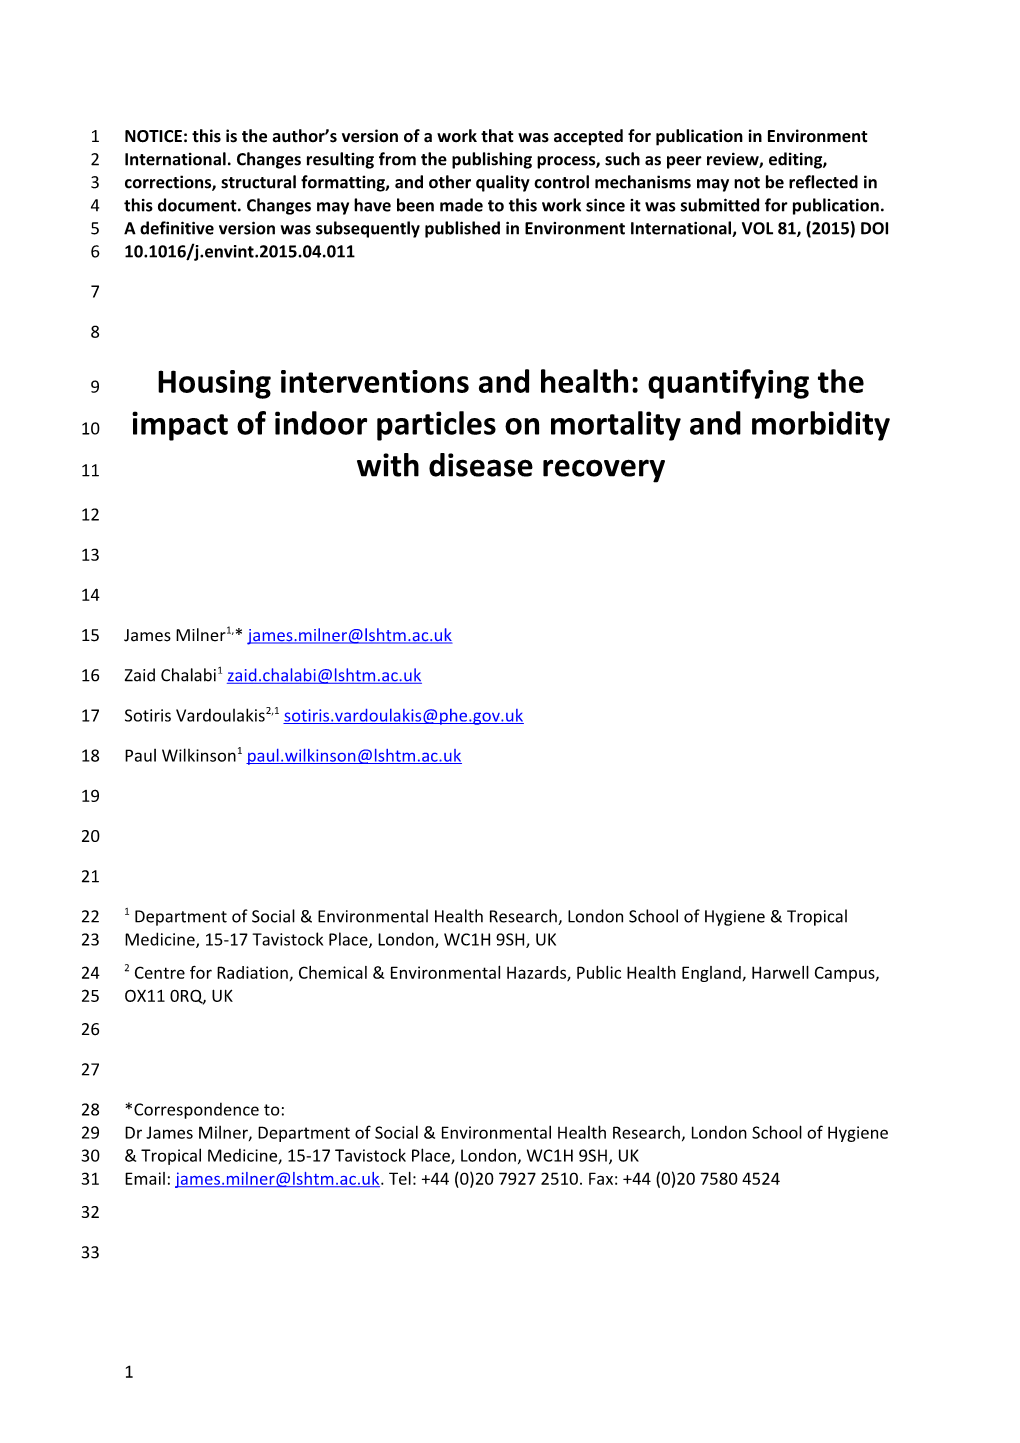 Housing Interventions and Health: Quantifying the Impact of Indoor Particles on Mortality